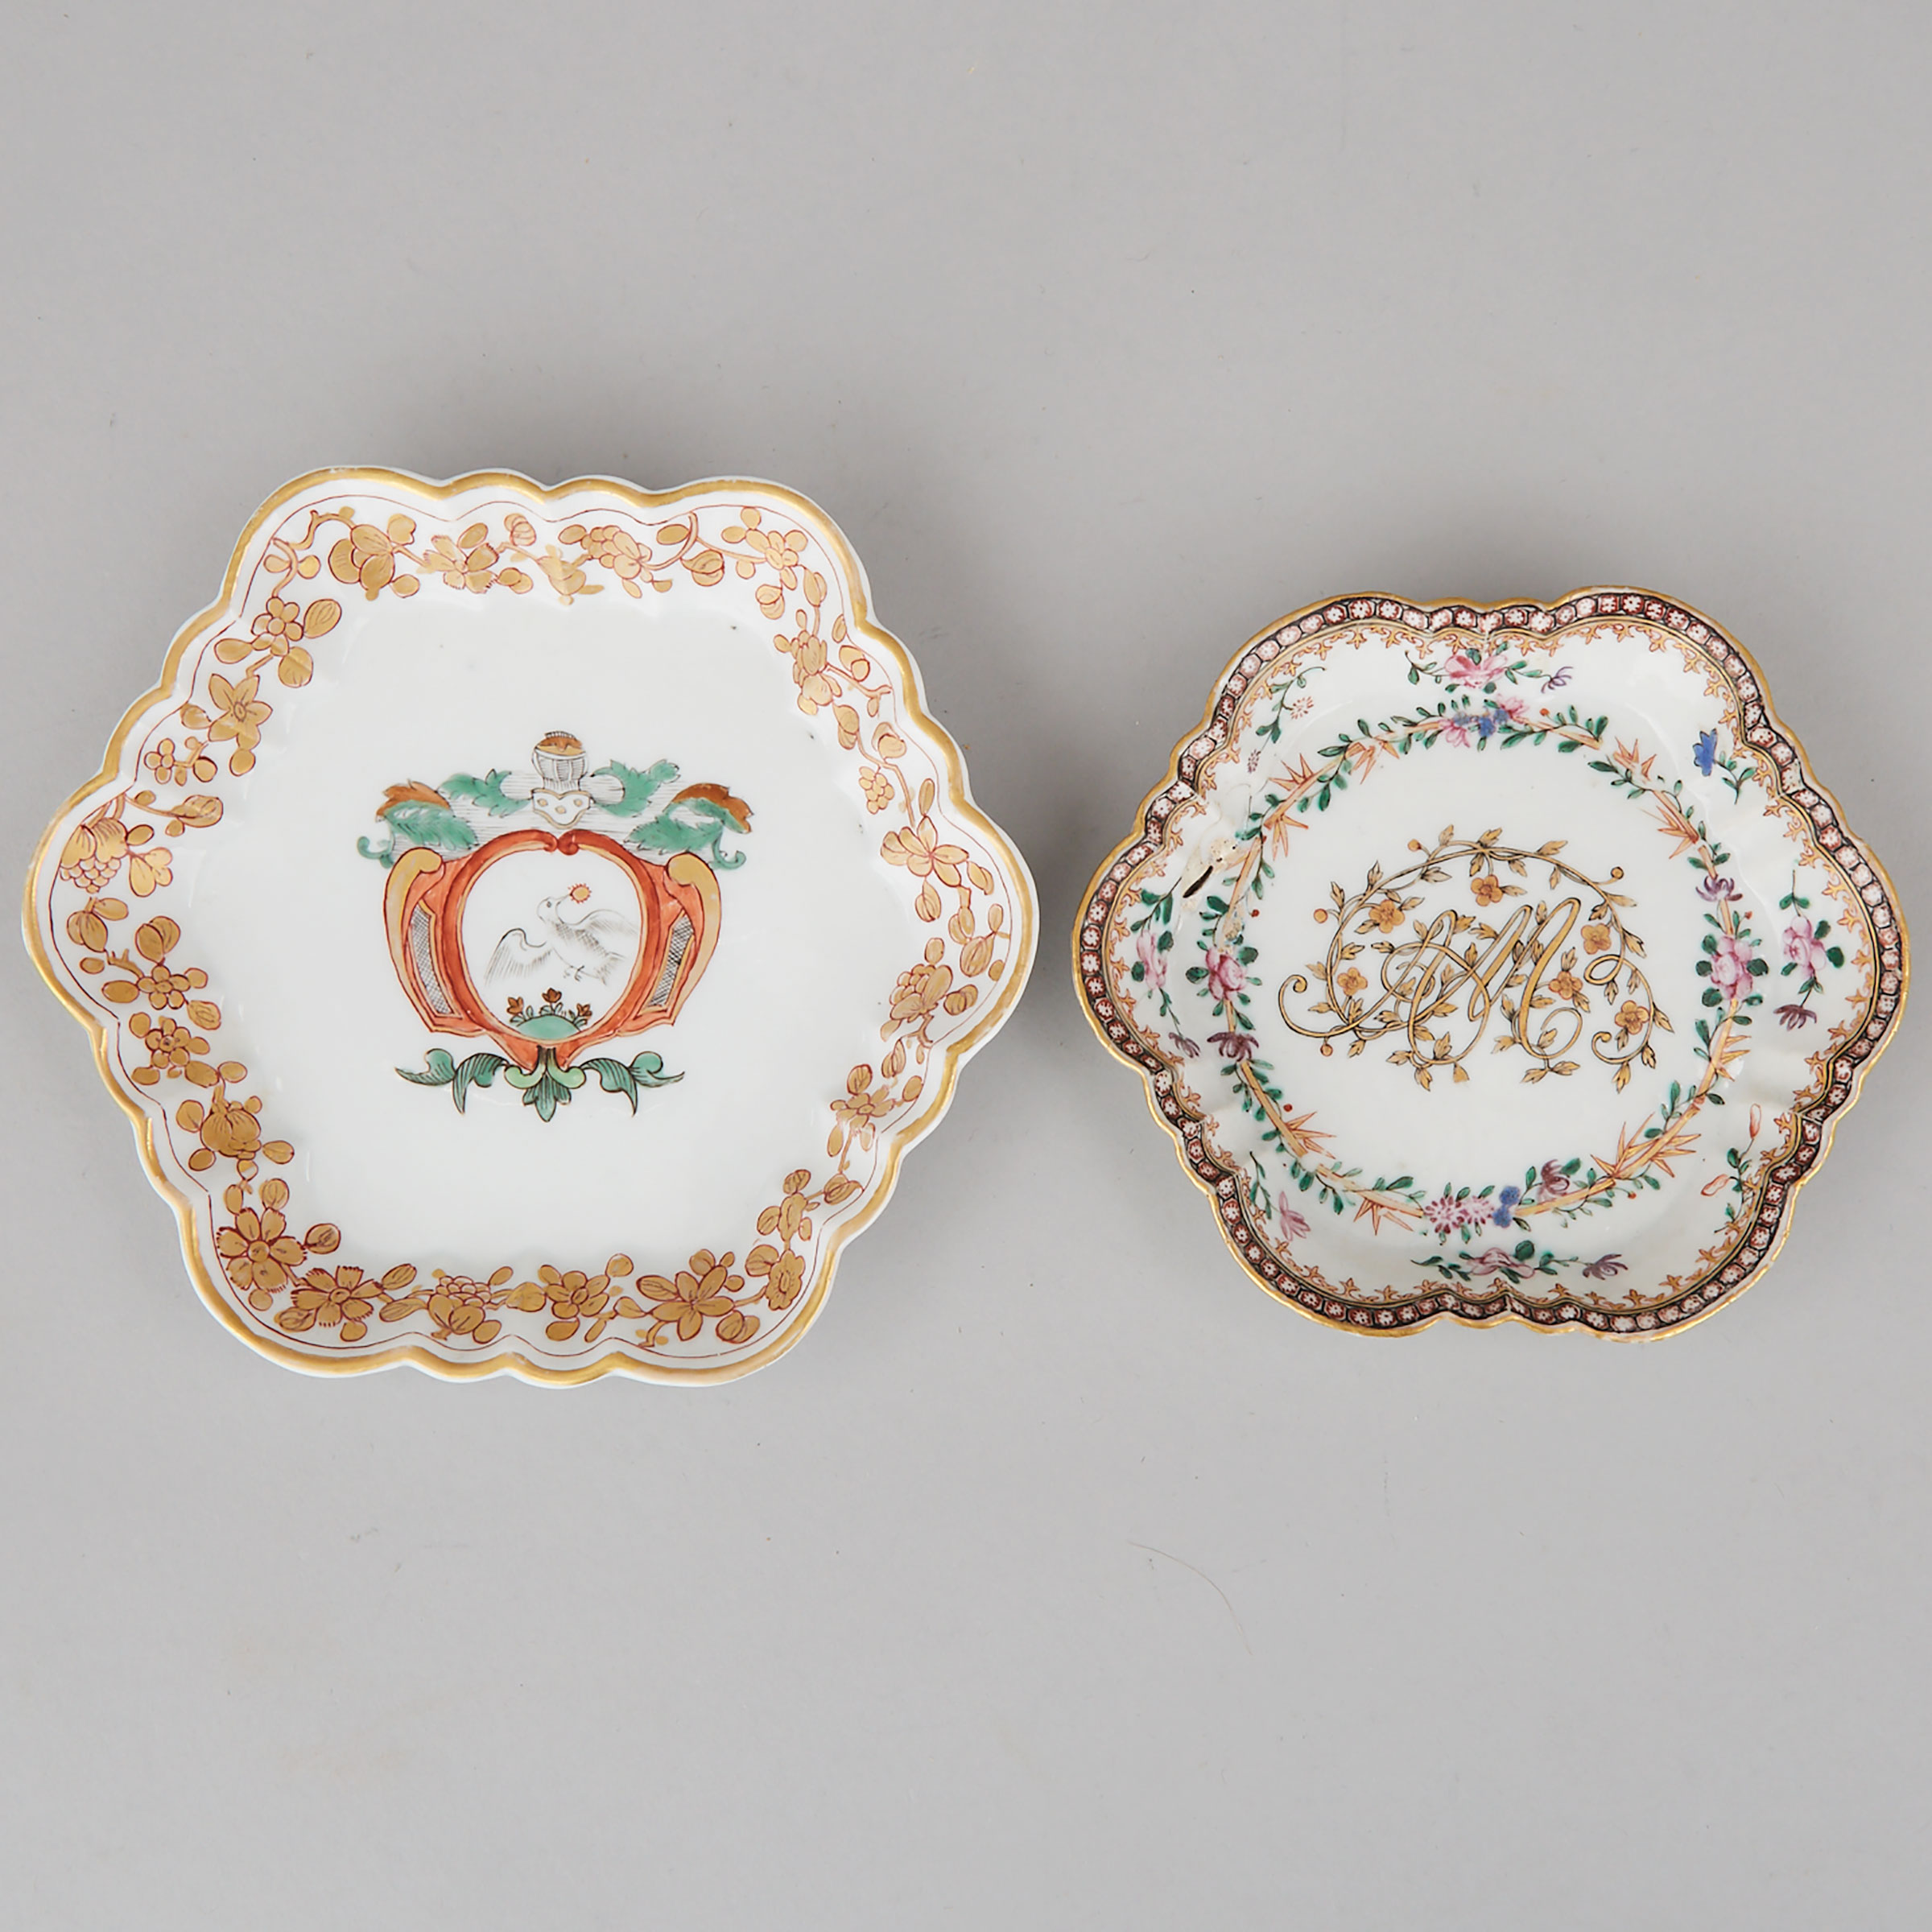 Two Chinese Export Style Armorial Porcelain Teapot Stands, the larger possibly French, late 18th/19th century